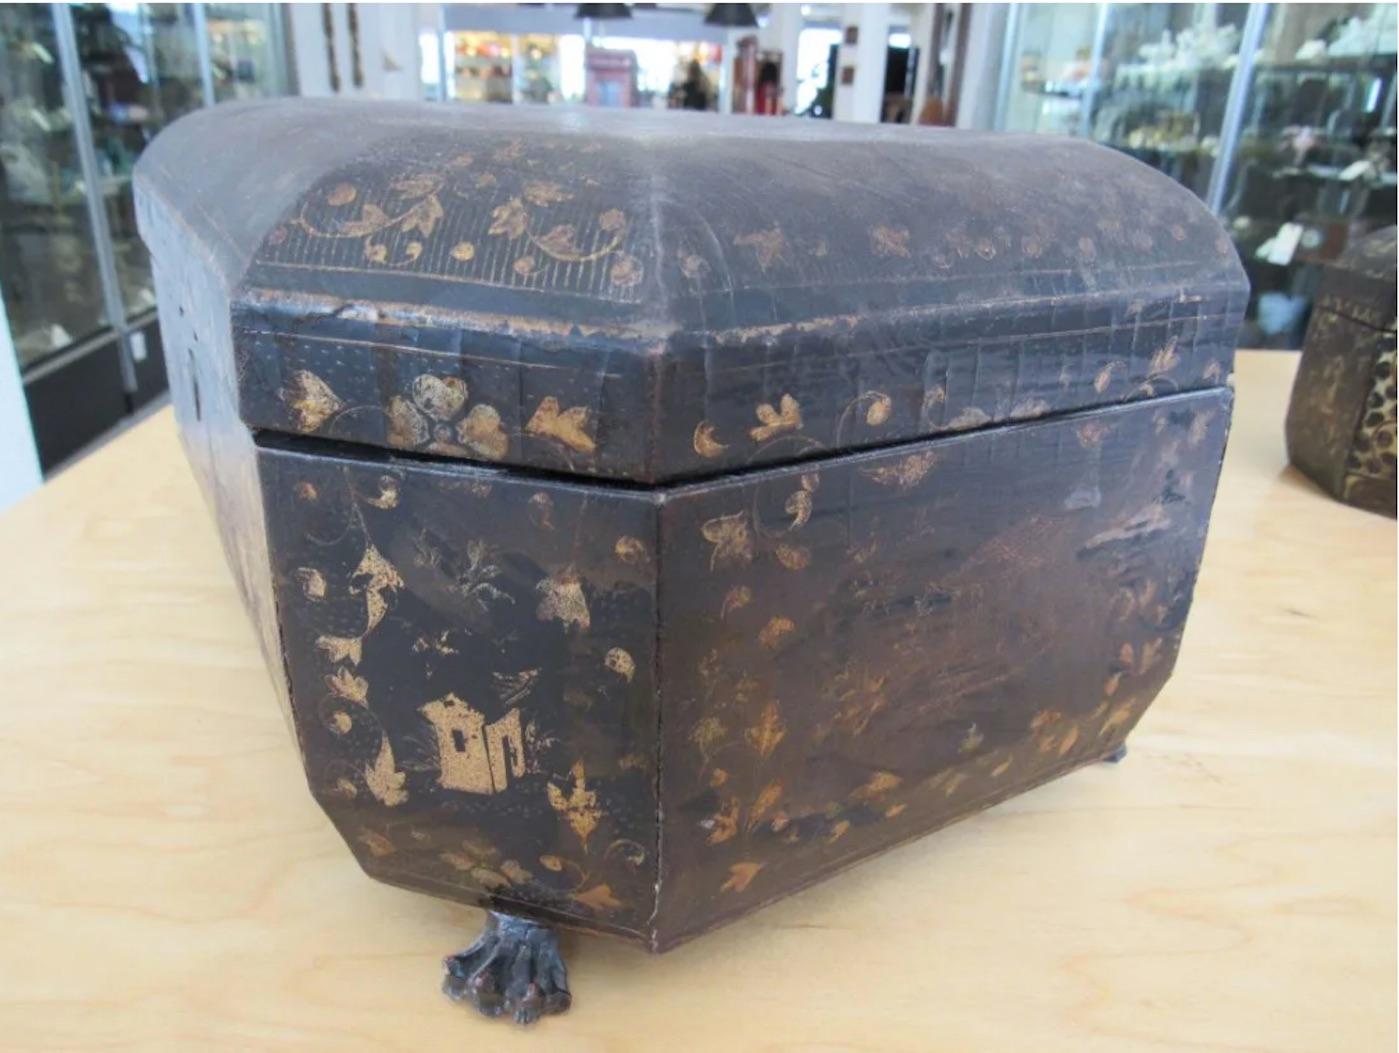 Two Chinese Export Lacquered Tea Caddy for the English Market, Priced Per Caddy For Sale 5